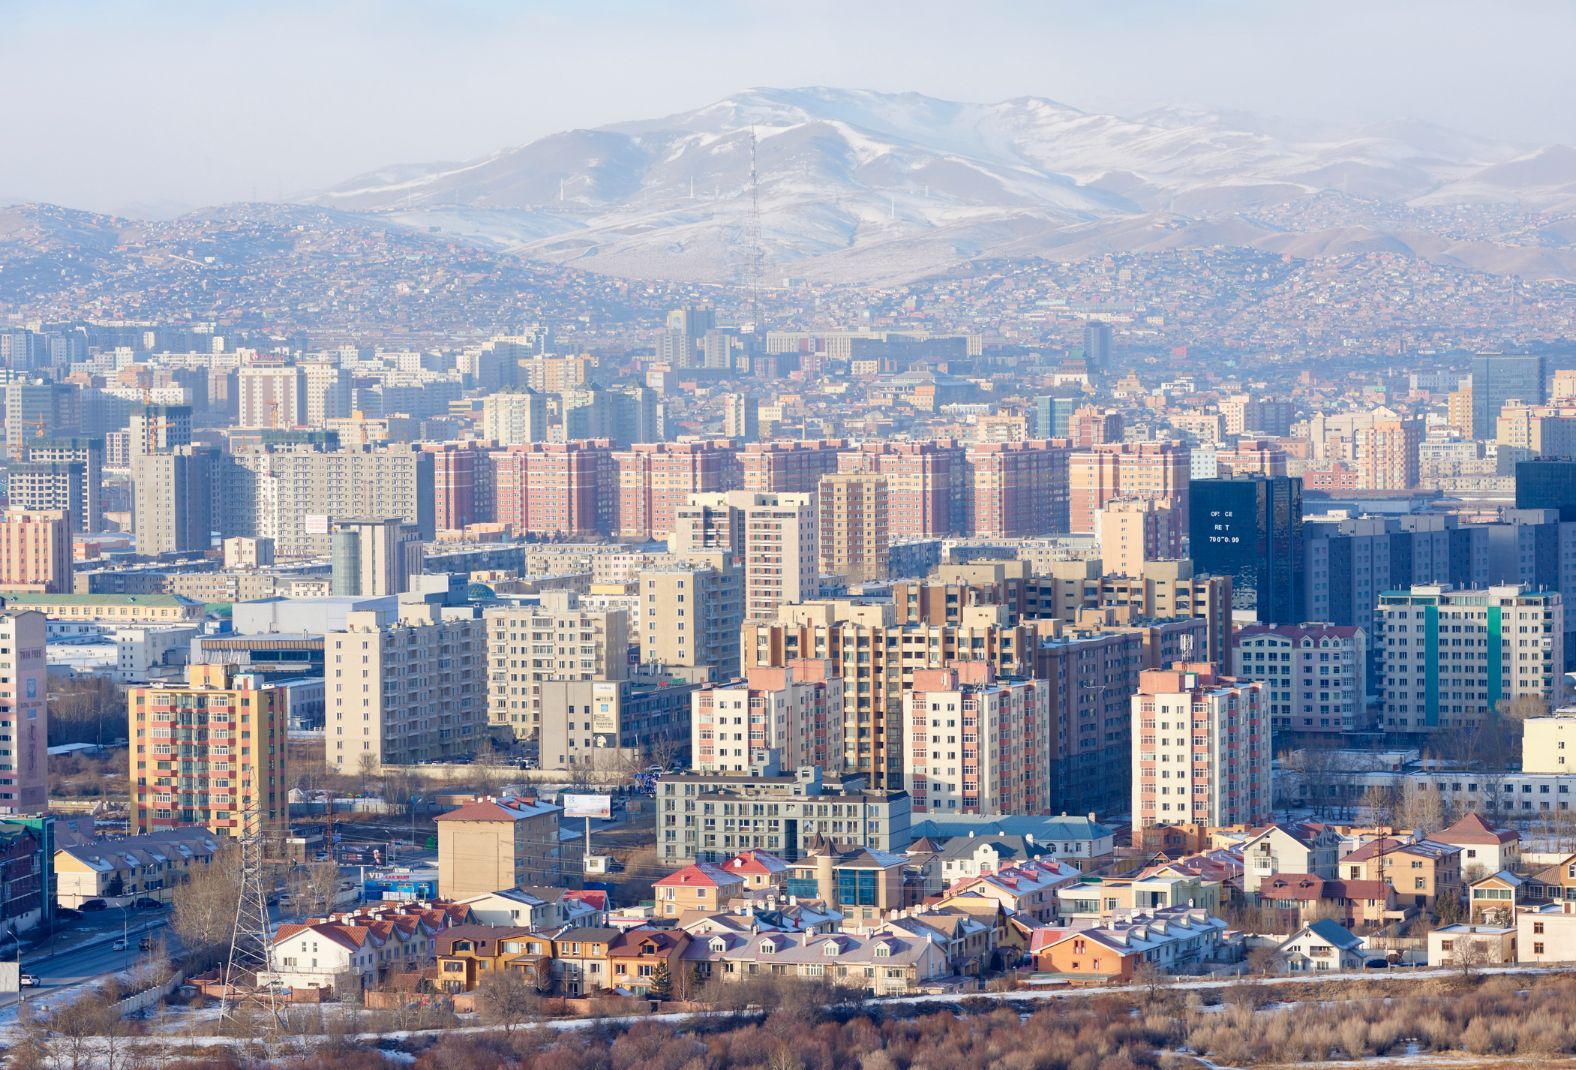 The sprawling scenery of downtown Ulaanbaatar in Mongolia and beyond, into the hills, full of gers, behind